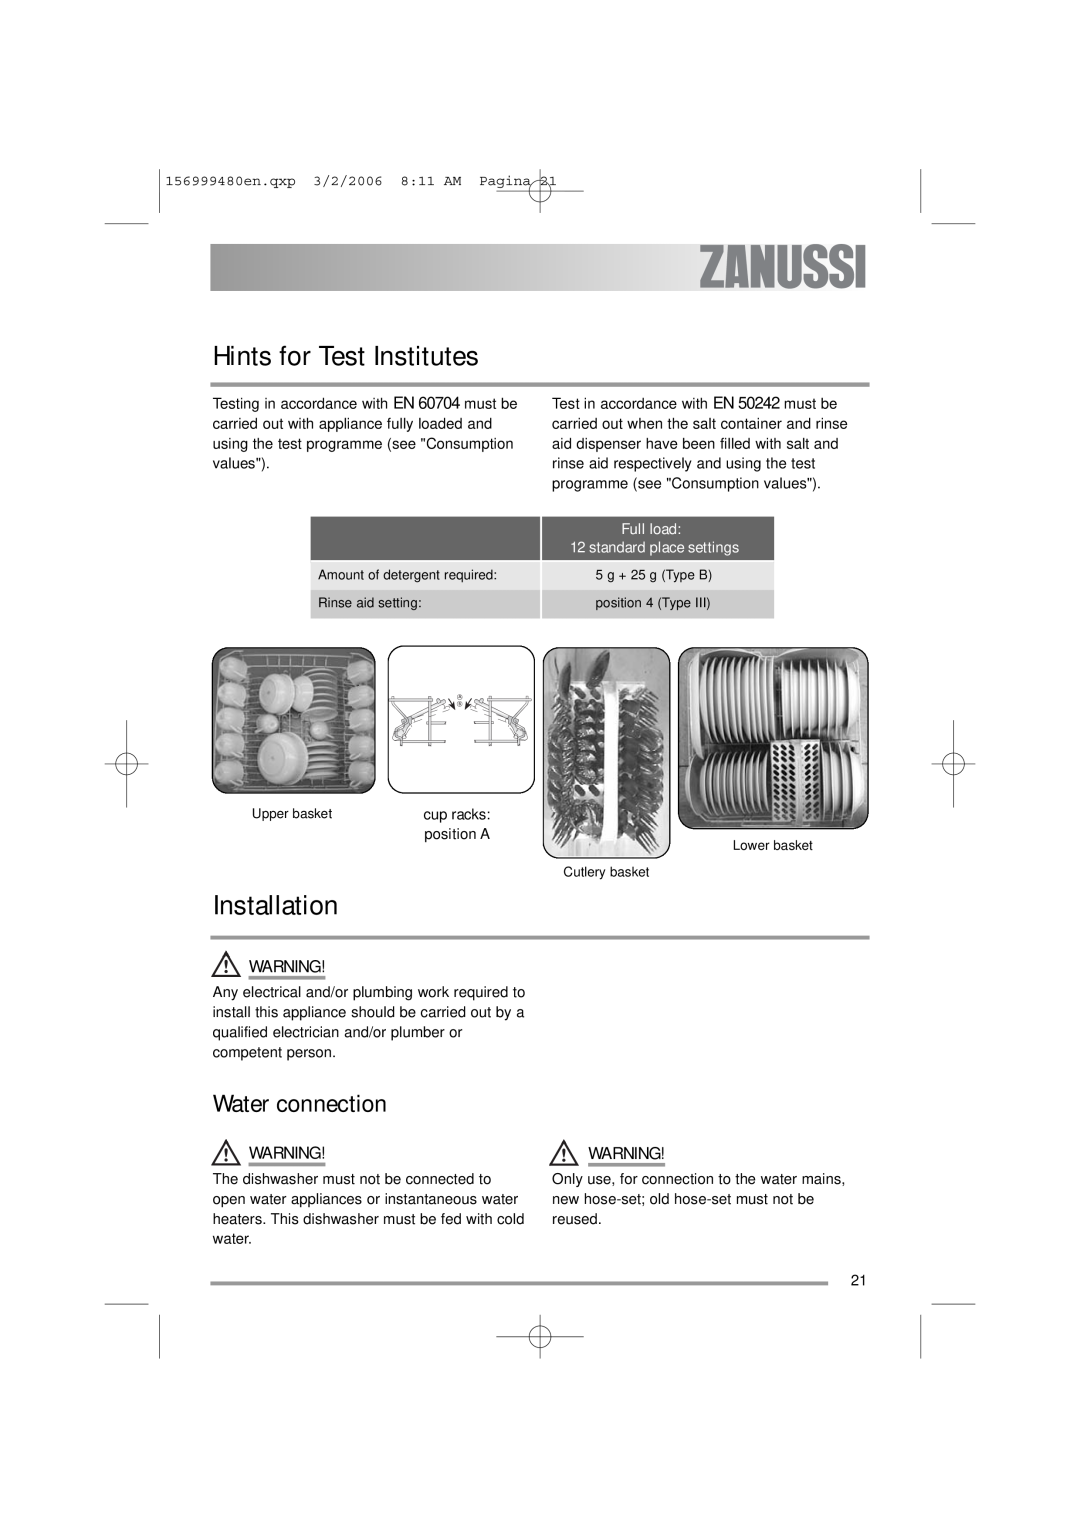 Zanussi ZDF311 user manual Hints for Test Institutes, Installation, Water connection 